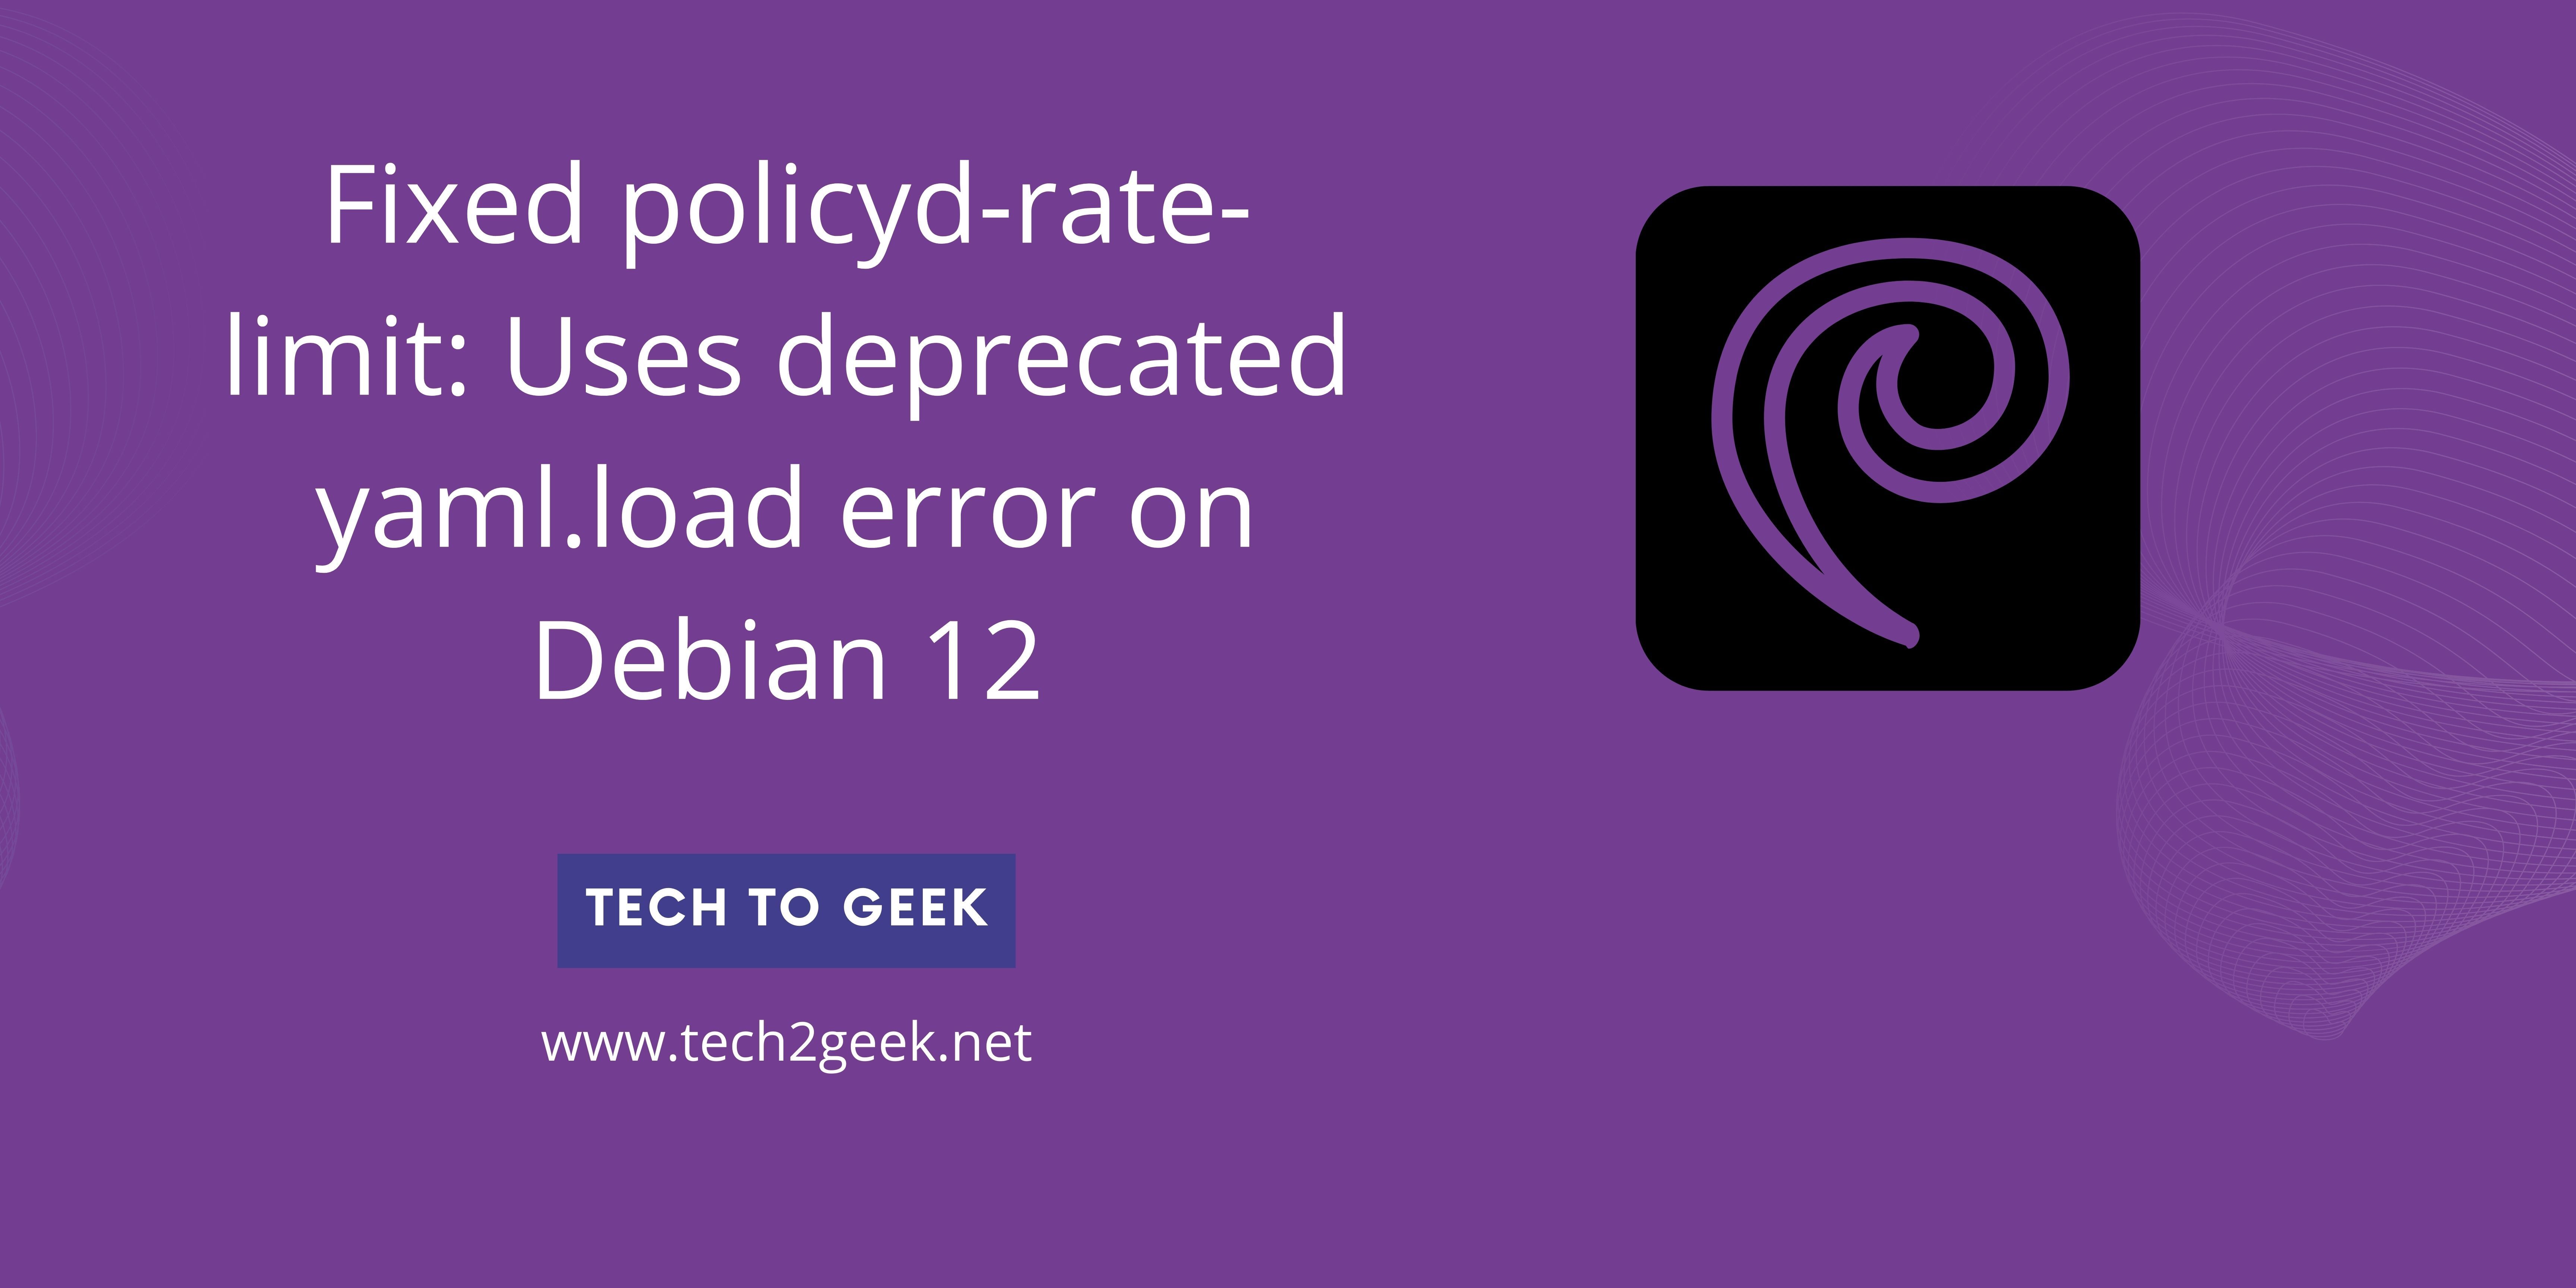 Fixed policyd-rate-limit: Uses deprecated yaml.load error on Debian 12